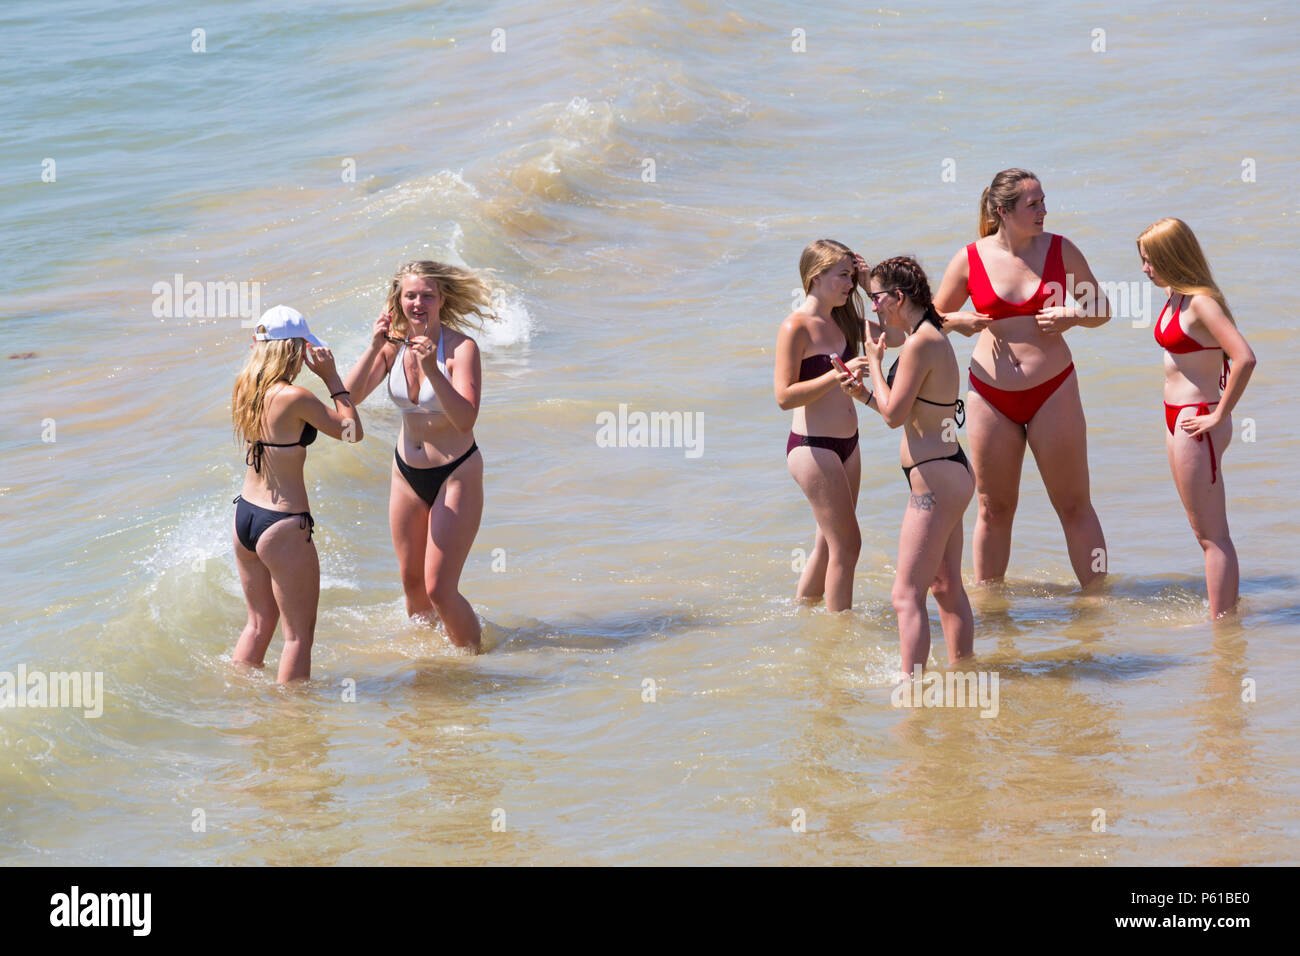 Bournemouth, Dorset, UK. 28th June 2018. UK weather: sunseekers head to the beaches at Bournemouth on another hot sunny day with unbroken blue skies and sunshine. A slight breeze makes the heat more bearable. A group of friends in skimpy bikinis have fun playing in the sea and taking photos. Credit: Carolyn Jenkins/Alamy Live News Stock Photo